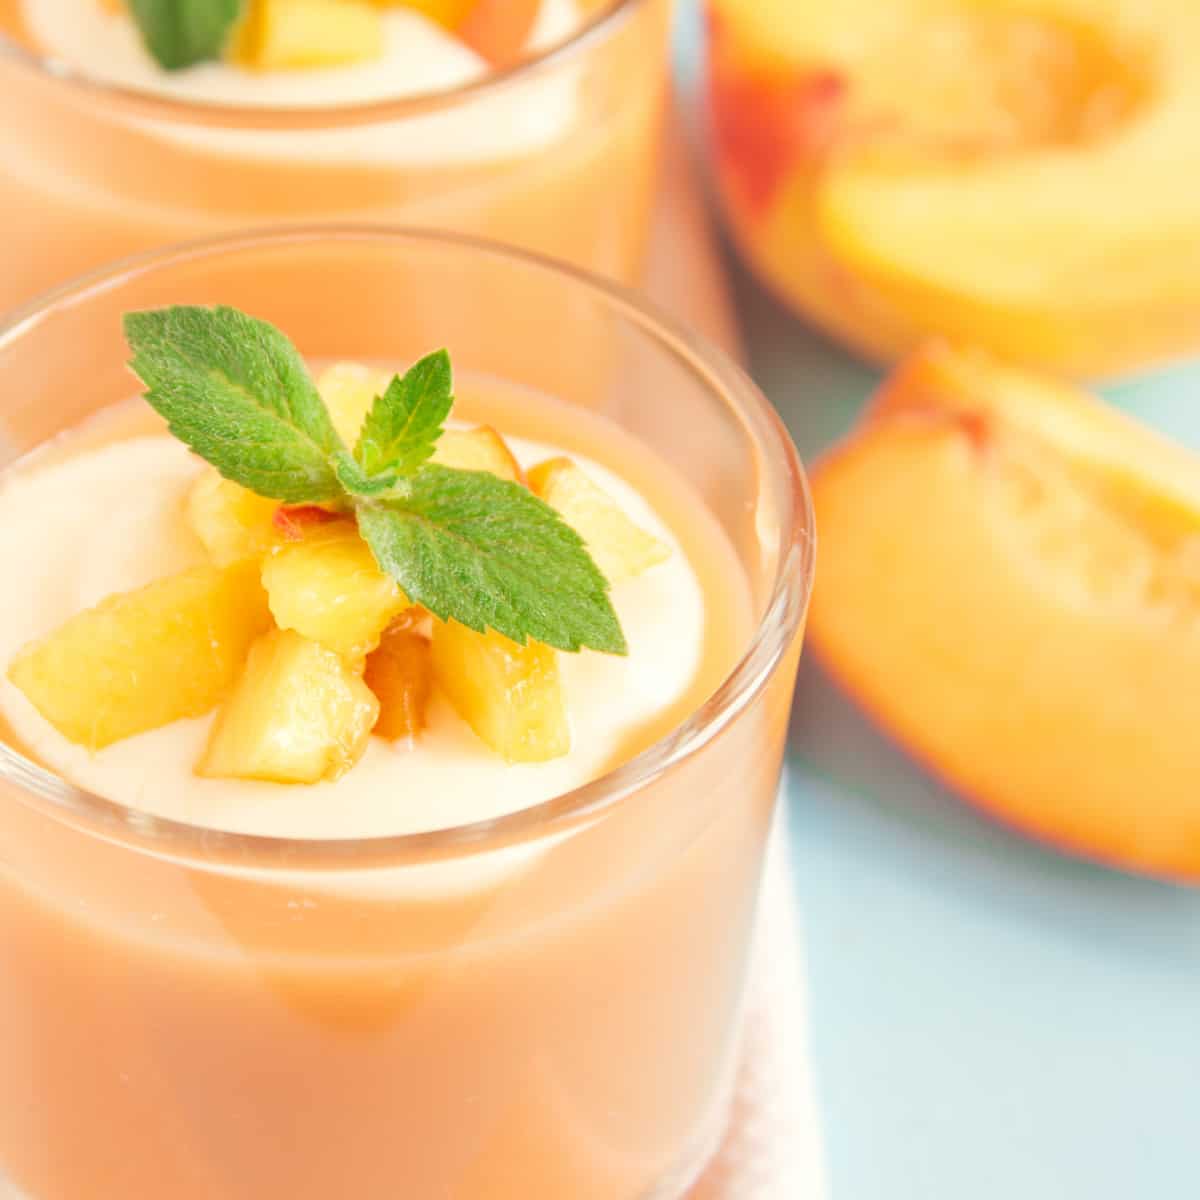 banana peach smoothie in a glass cup garnished with mint